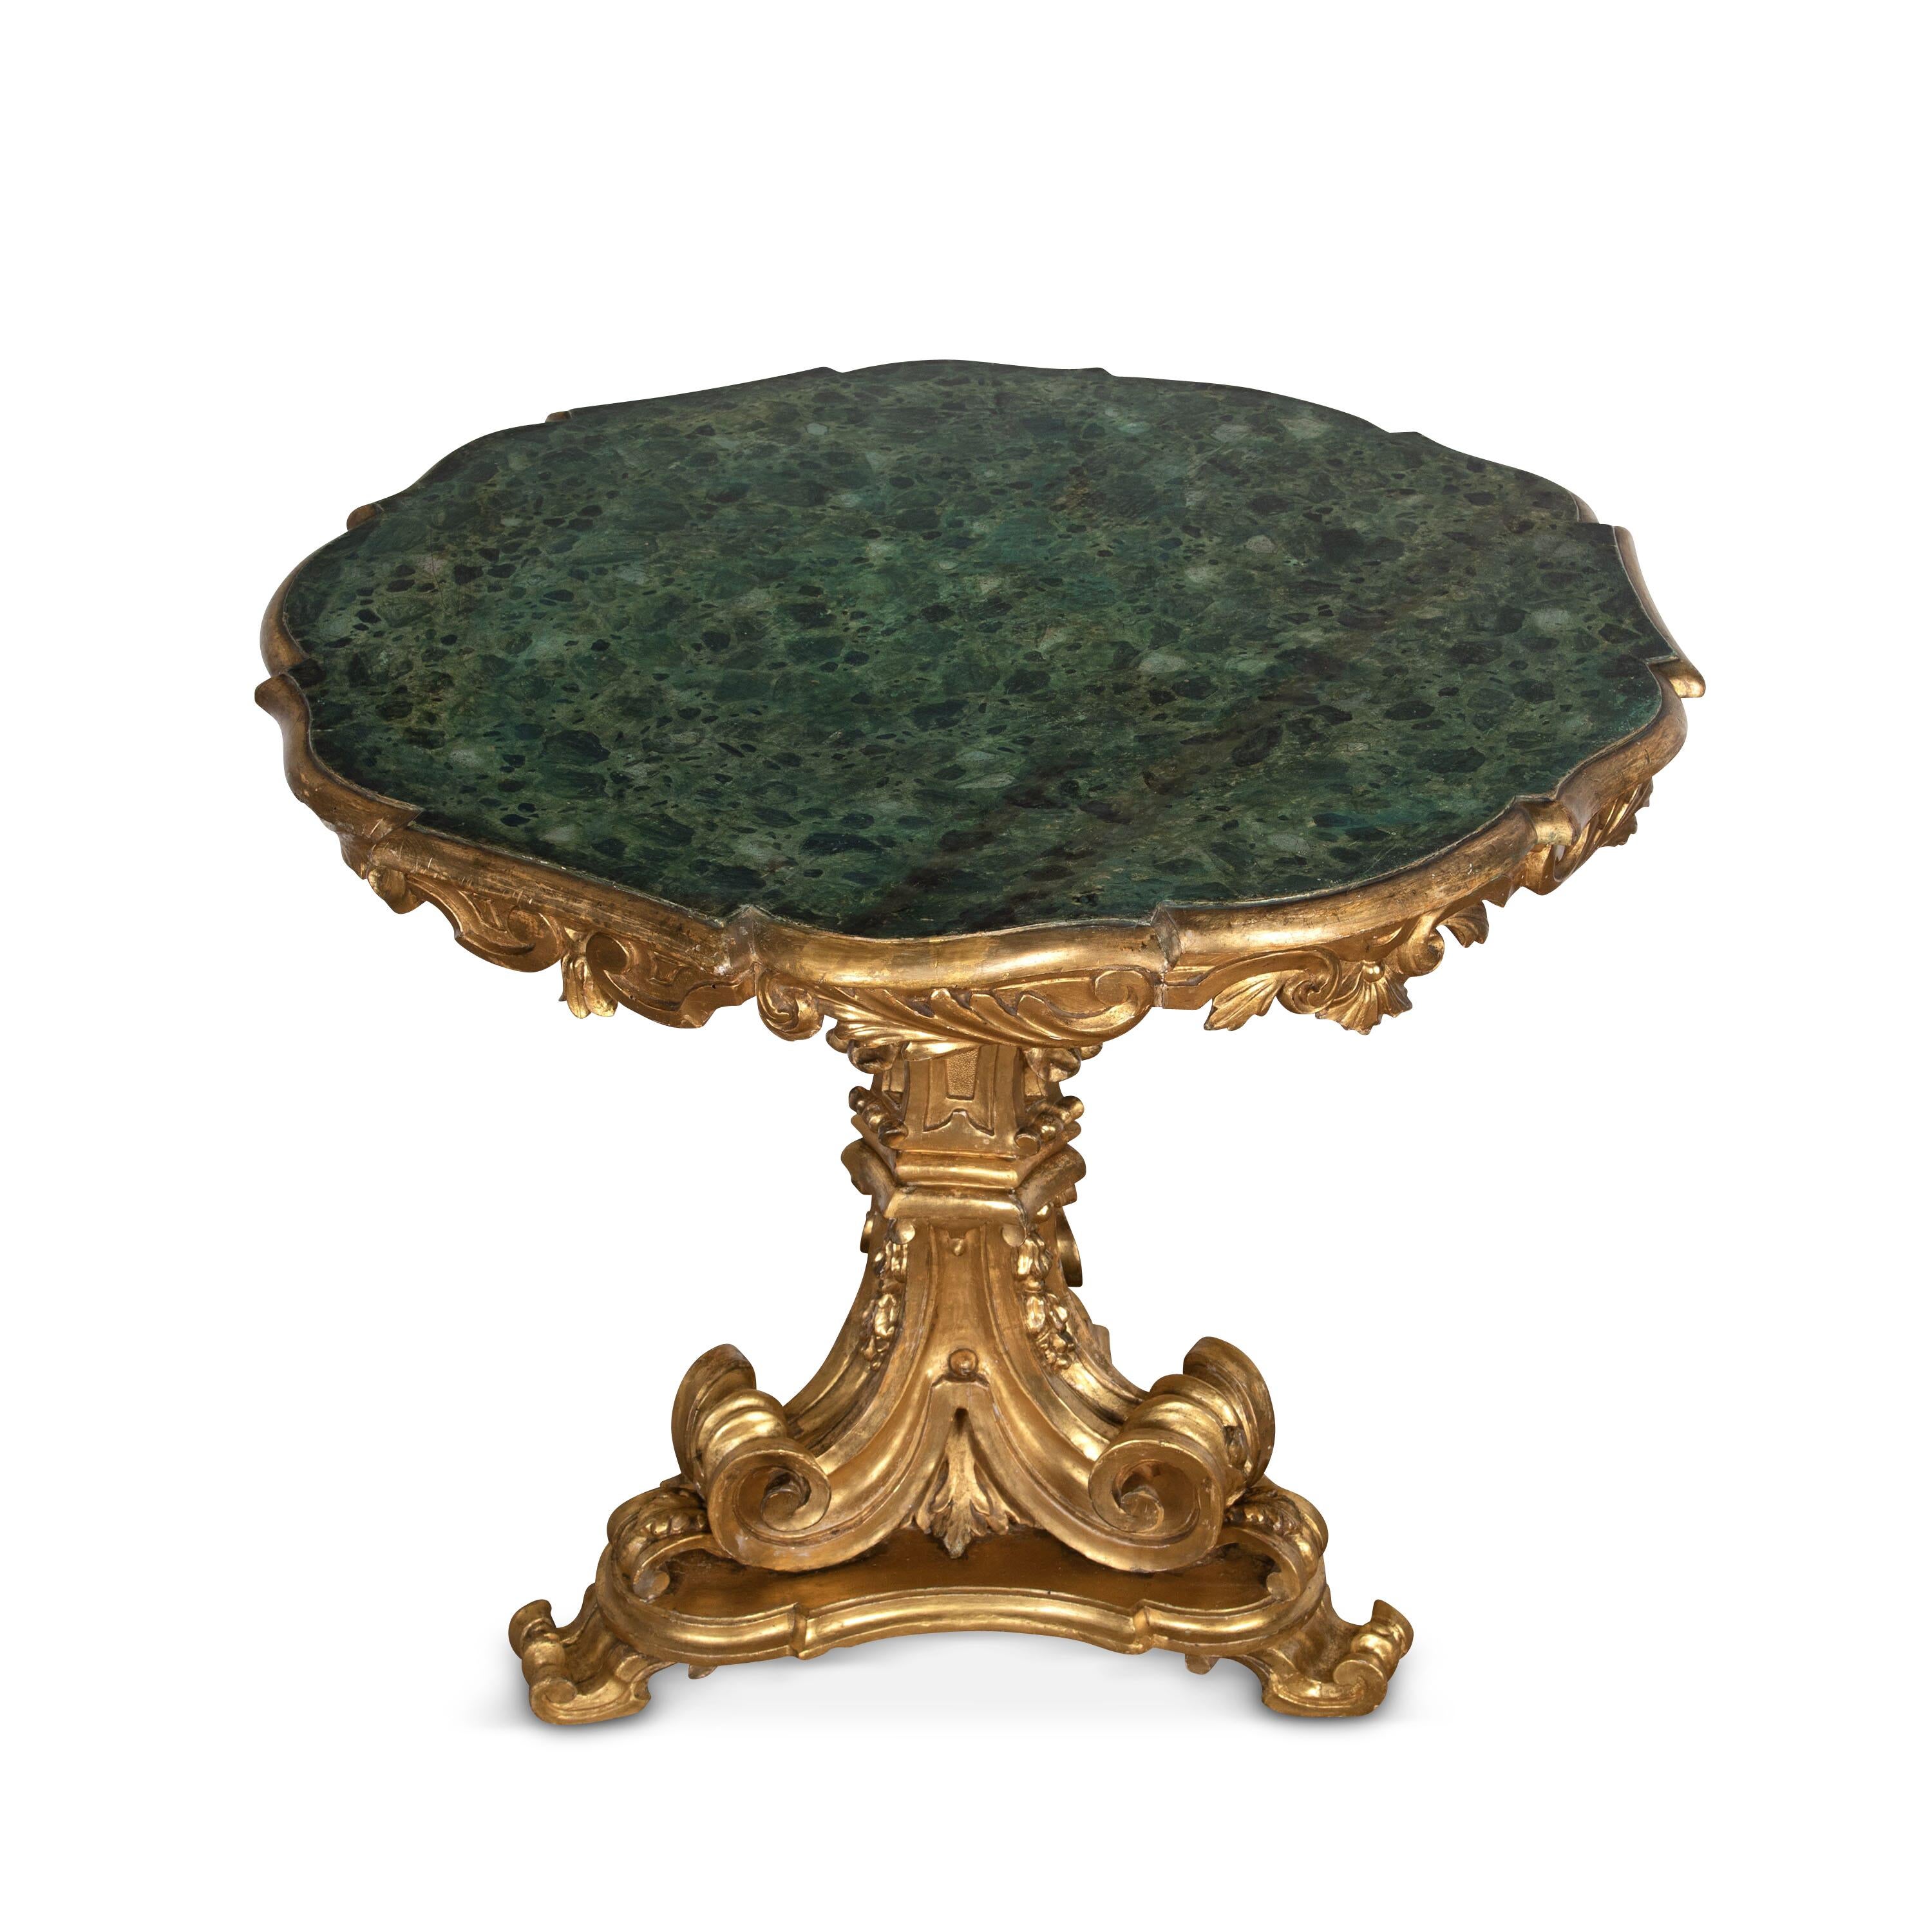 A stylish early 19th century Italian centre table. The simulated marble top with shaped moulded edge and acanthus carved frieze, raised on a shapely giltwood triform base with exaggerated scrolls, foliate carving, and terminating in further scroll